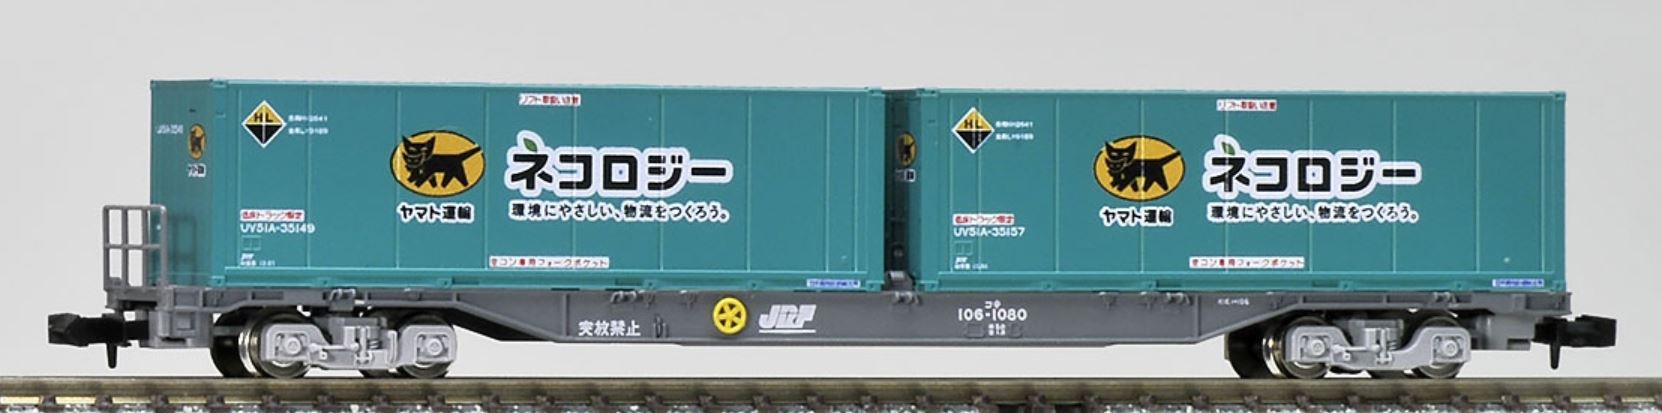 Tomix 08723 8723 N Freight Car Container, Type Koki 106, Later Version, Ep V JRF